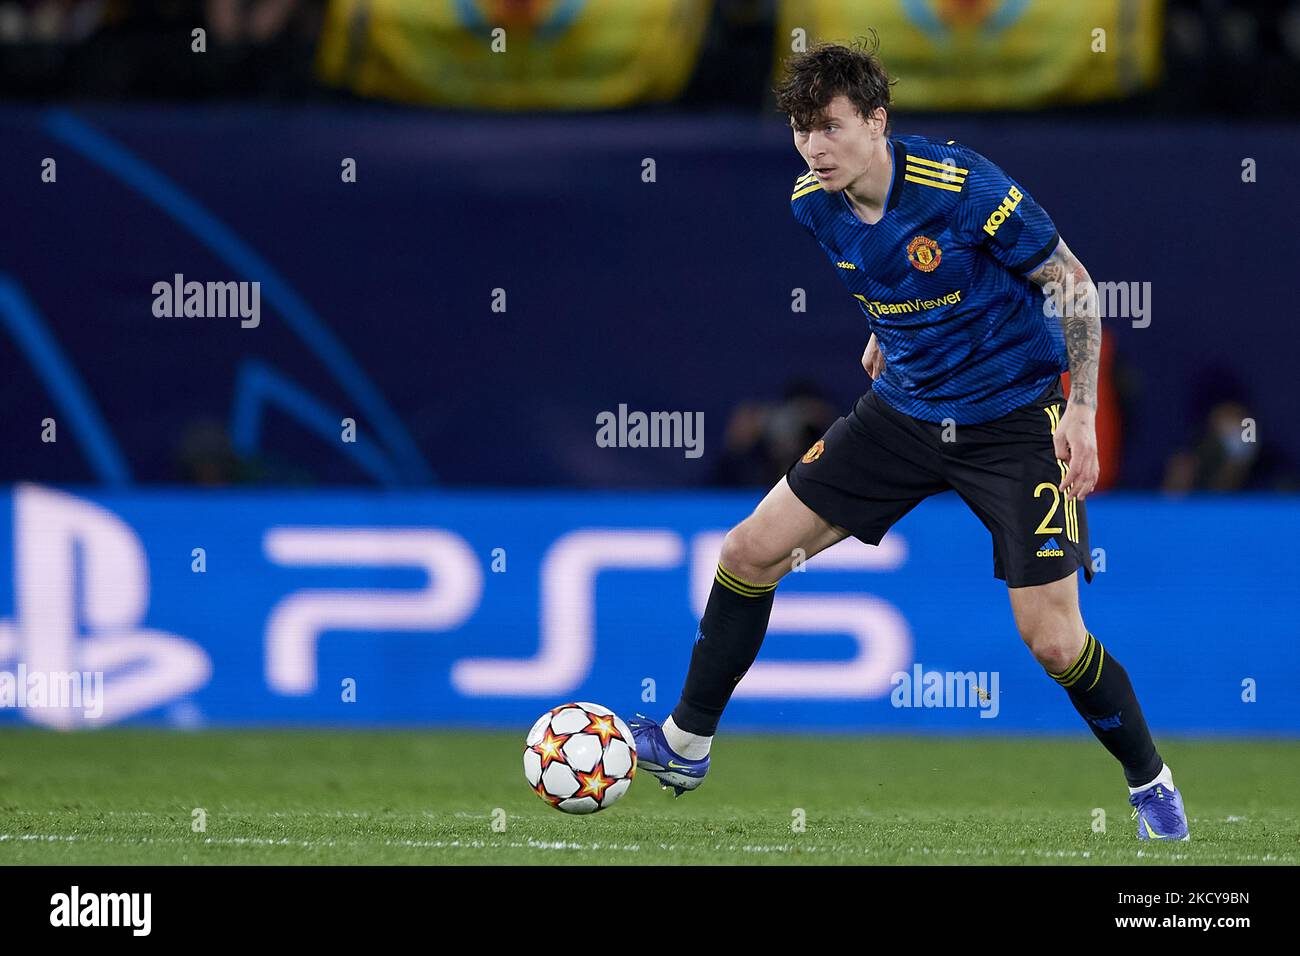 Victor Lindelof of Manchester United controls the ball during the UEFA Champions League group F match between Villarreal CF and Manchester United at Estadio de la Ceramica on November 23, 2021 in Villarreal, Spain. (Photo by Jose Breton/Pics Action/NurPhoto) Stock Photo